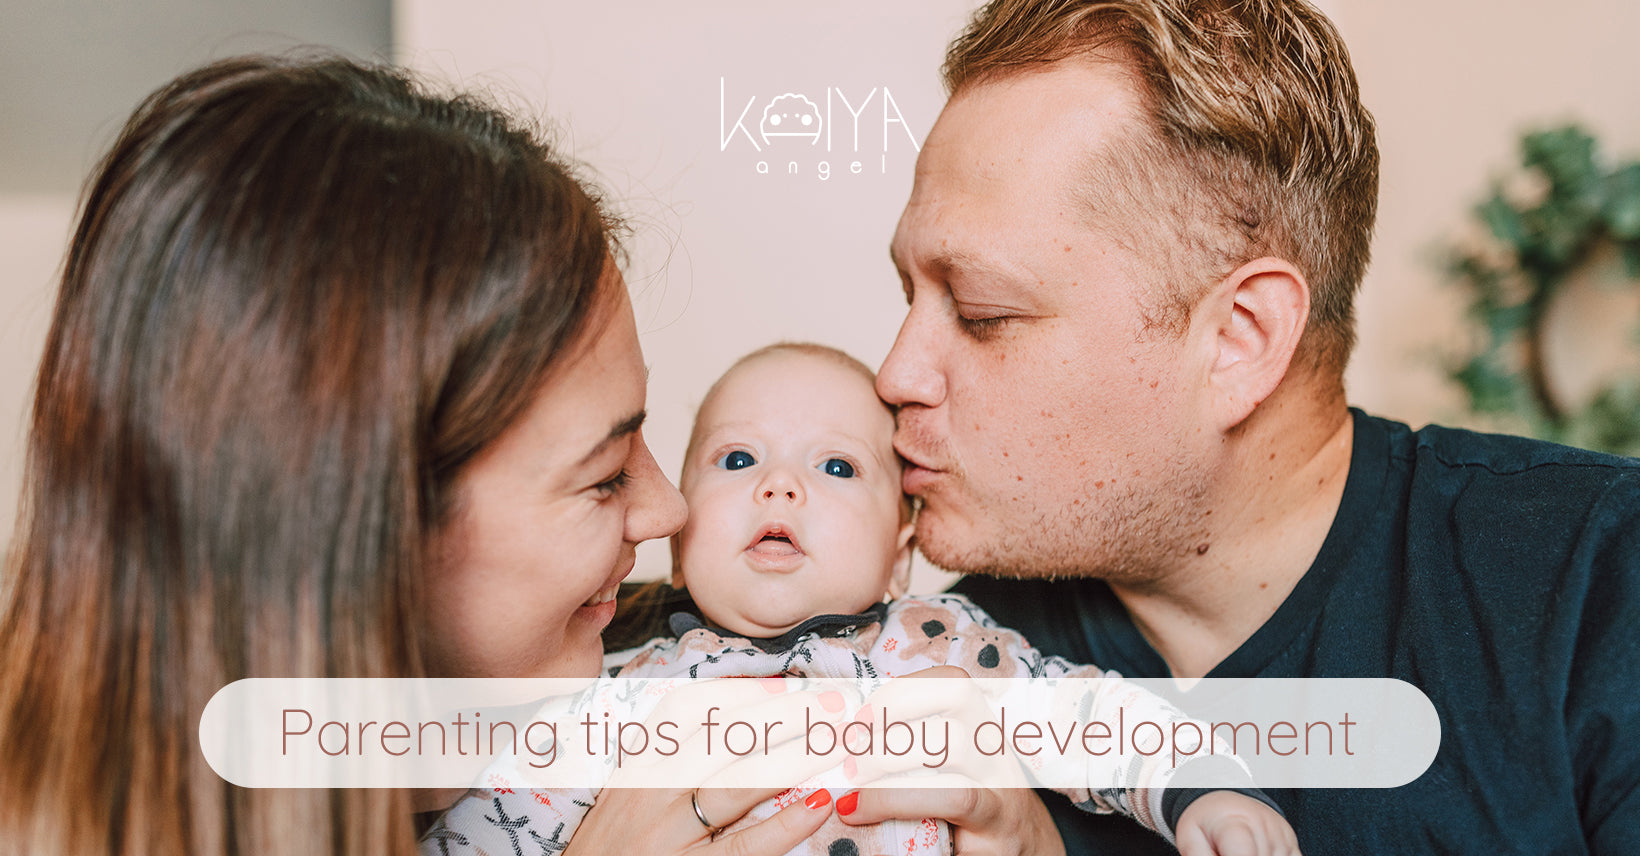 Parenting tips for baby development